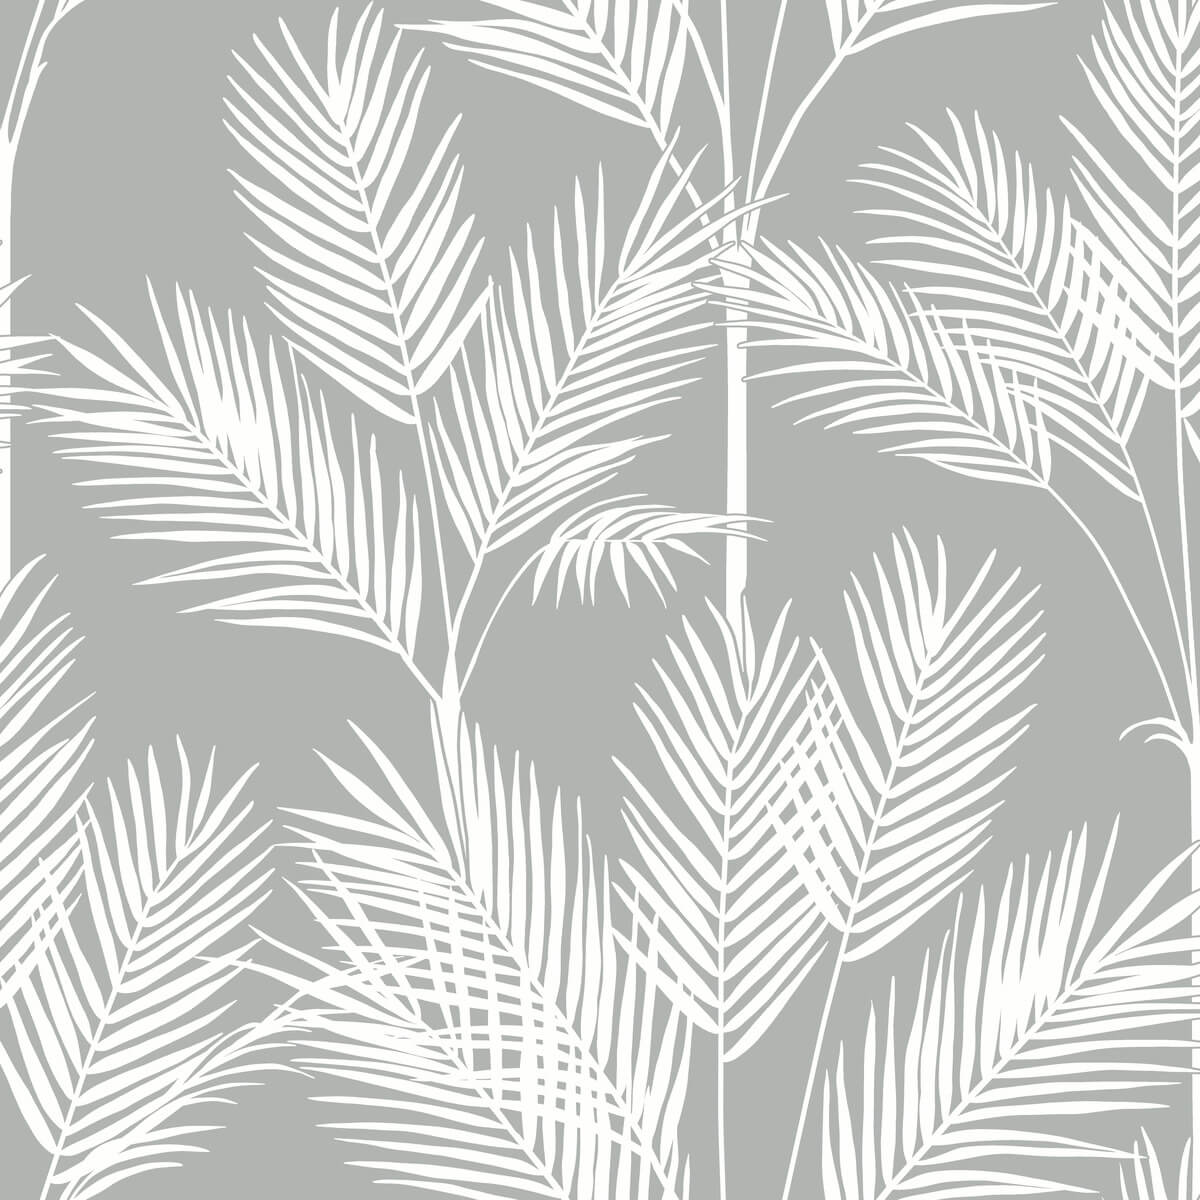 Waters Edge Resource Library King Palm Silhouette Wallpaper - Gray